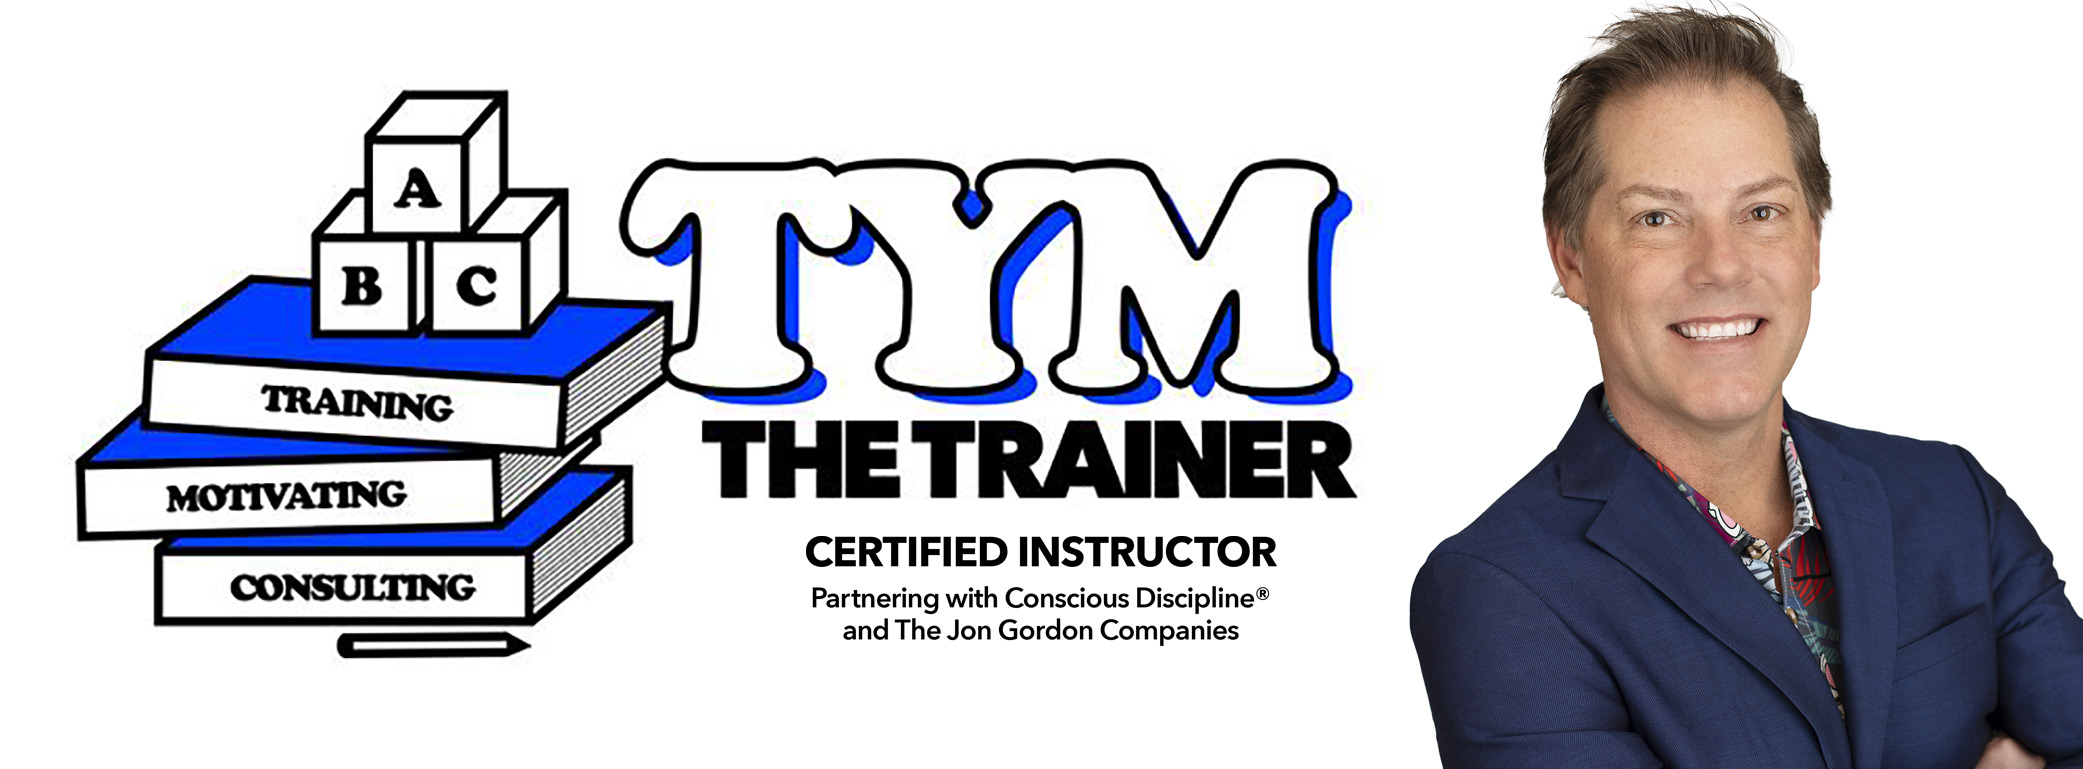 Tym the Trainer Certified Trainer with Conscious Discipline and the Jon Gordon Companies